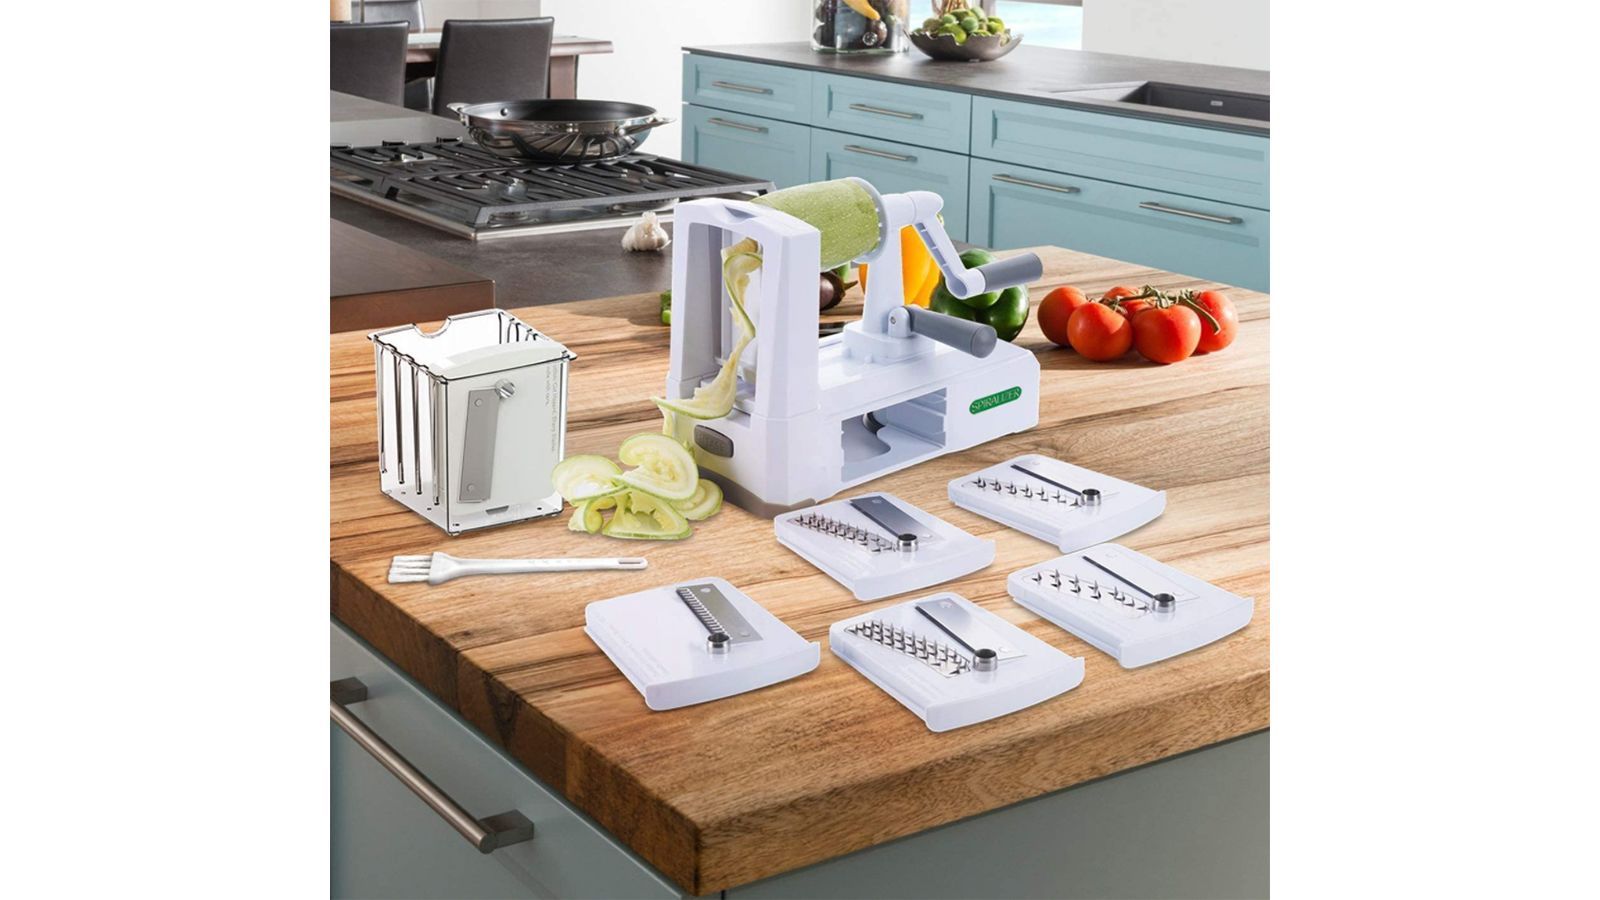 Smart cooking kitchen gadgets to speed up meal prep times » Gadget Flow